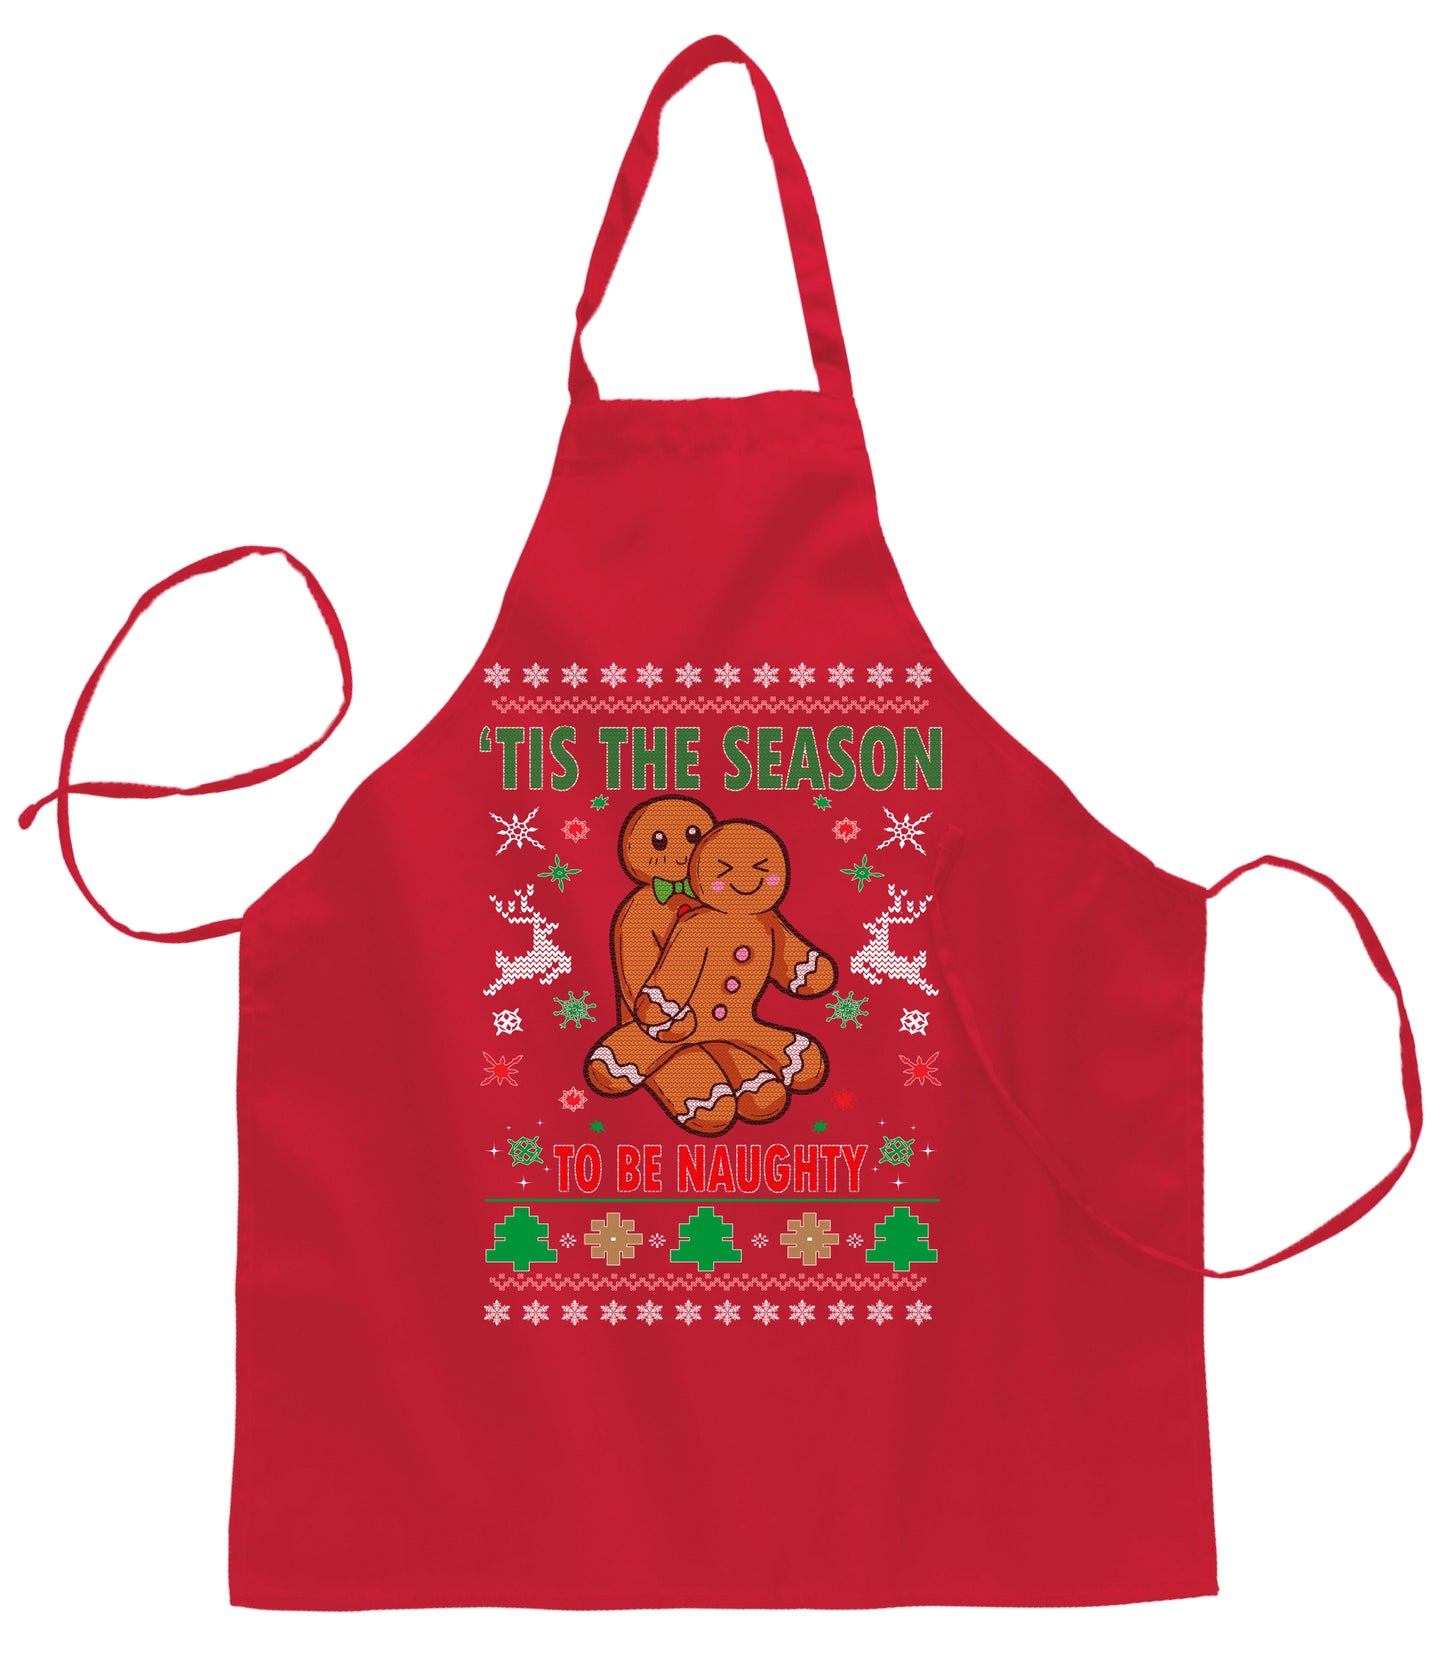 Tis' The Season to Be Naughty  Ugly Christmas Sweater Ugly Christmas Butcher Graphic Apron for Kitchen BBQ Grilling Cooking